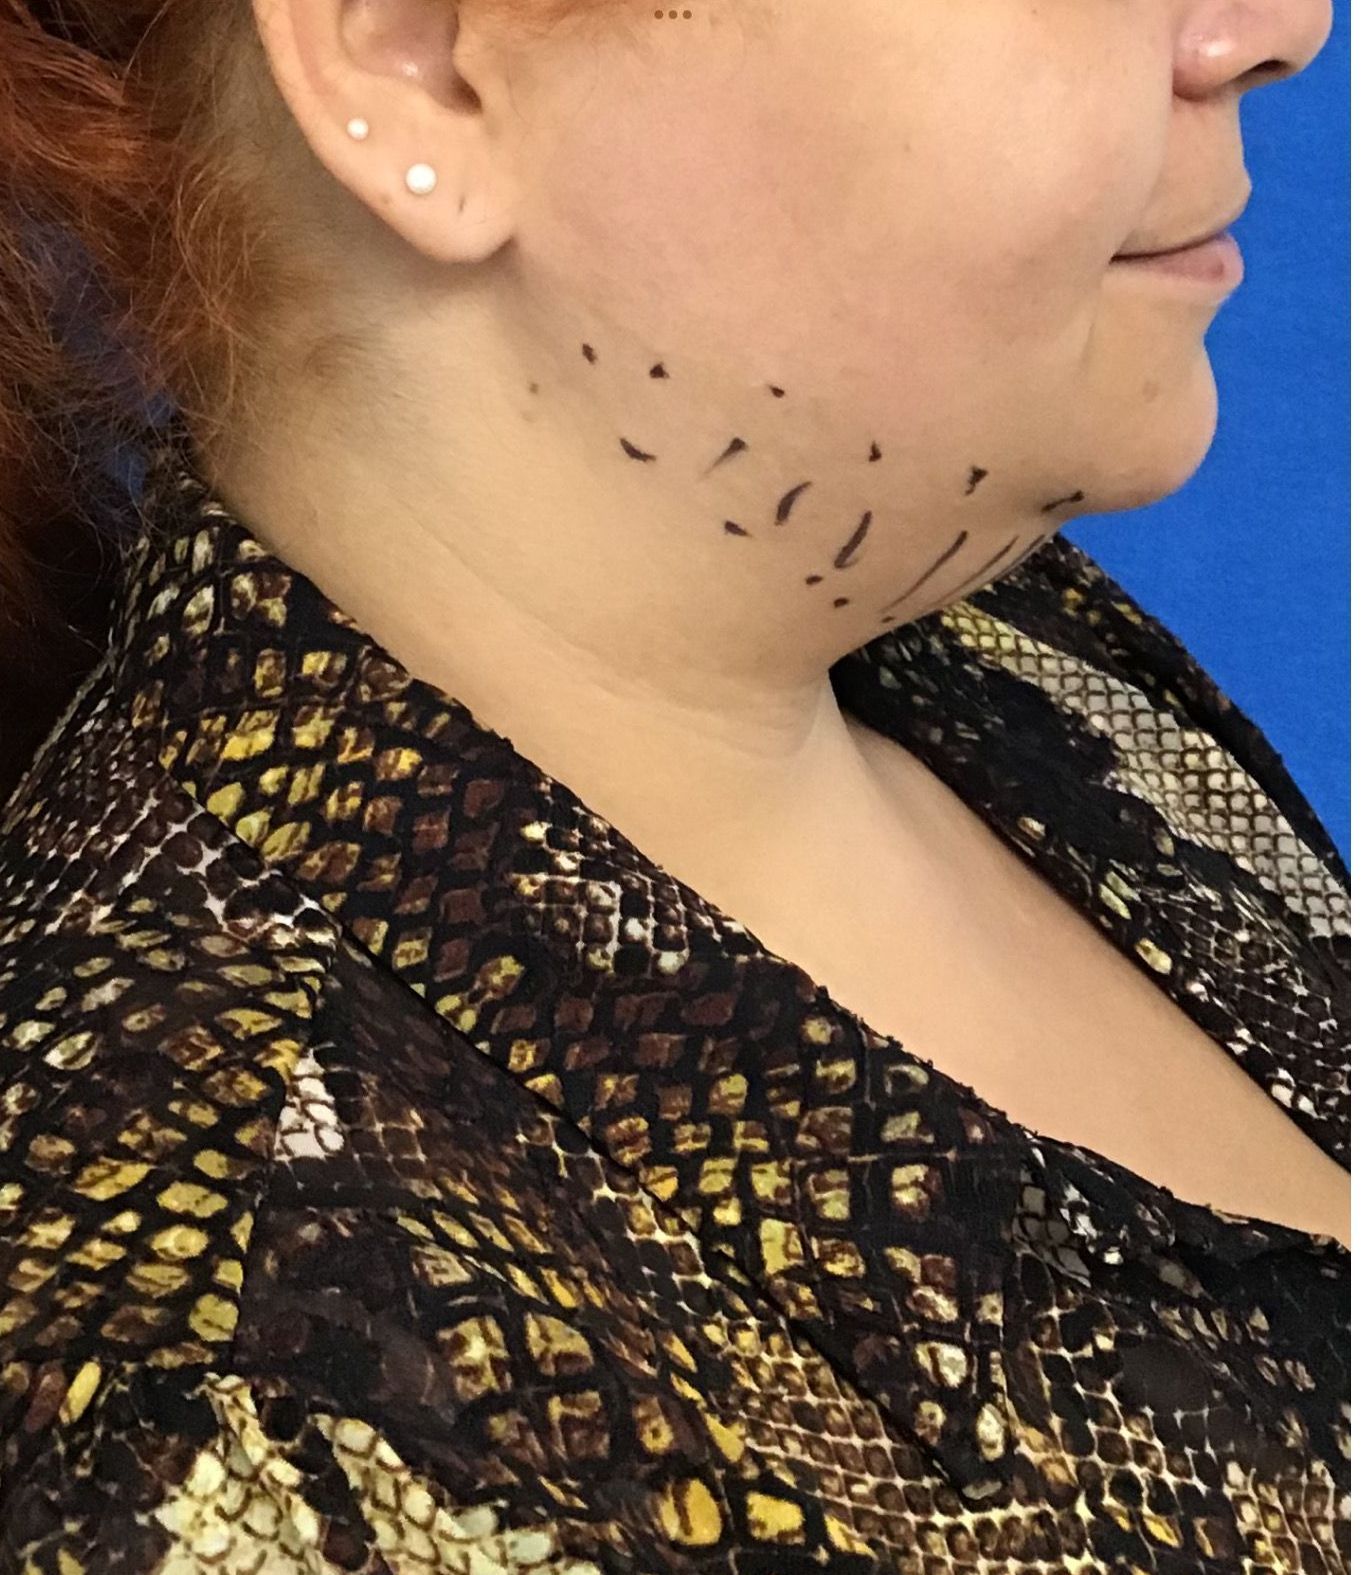 A woman in a snake print shirt has lines drawn on her neck